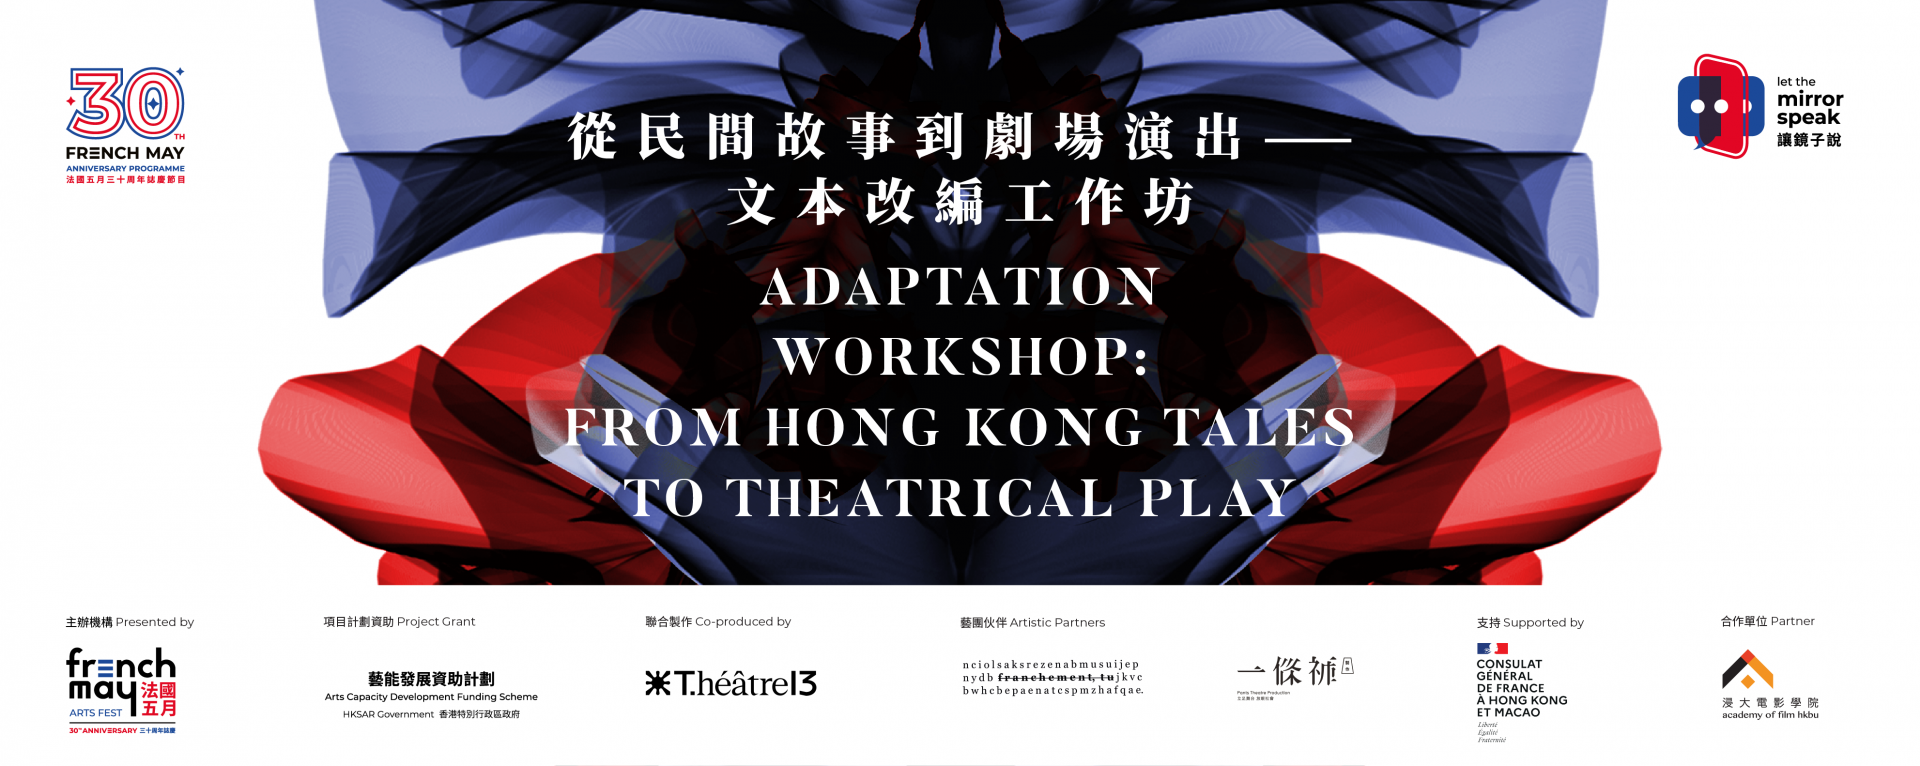 Adaptation Workshop: From Hong Kong Tales to Theatrical Play